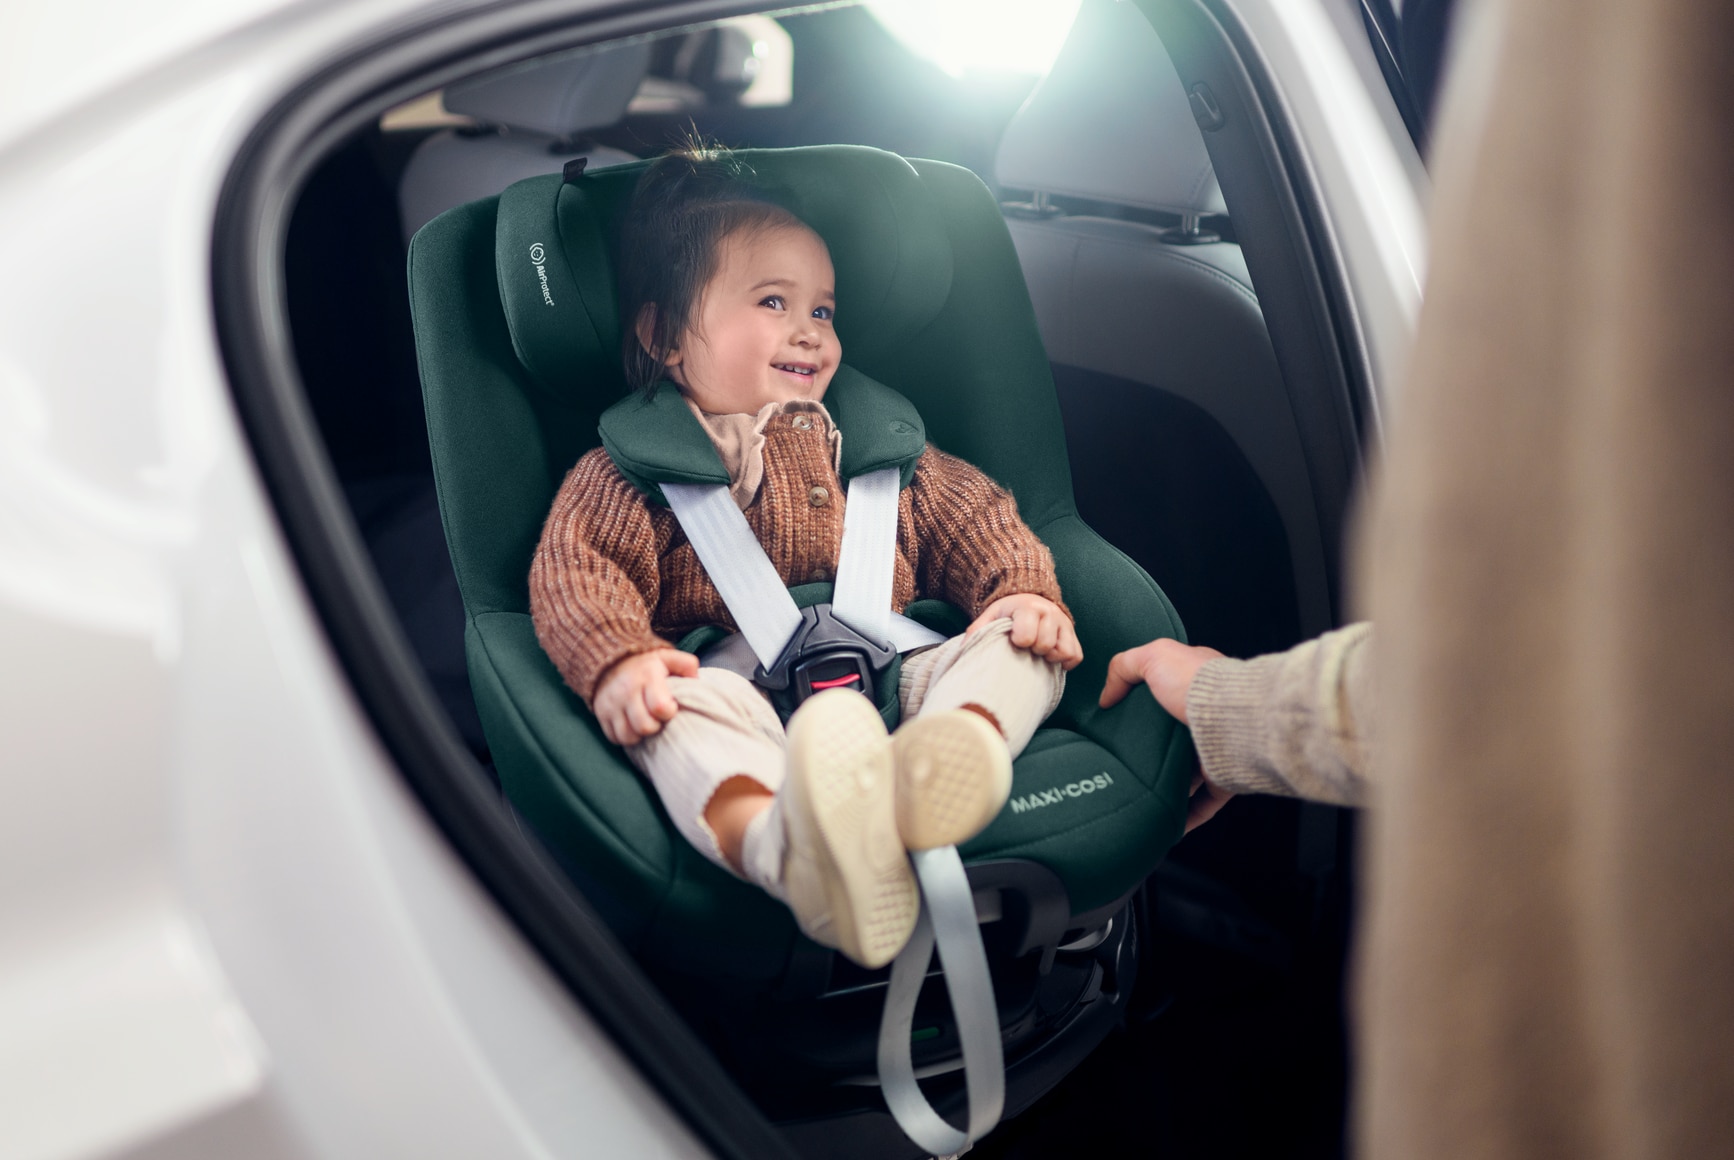 Your Guide: 360 Rotating and Swivel Child Car Seats By Baby & Co